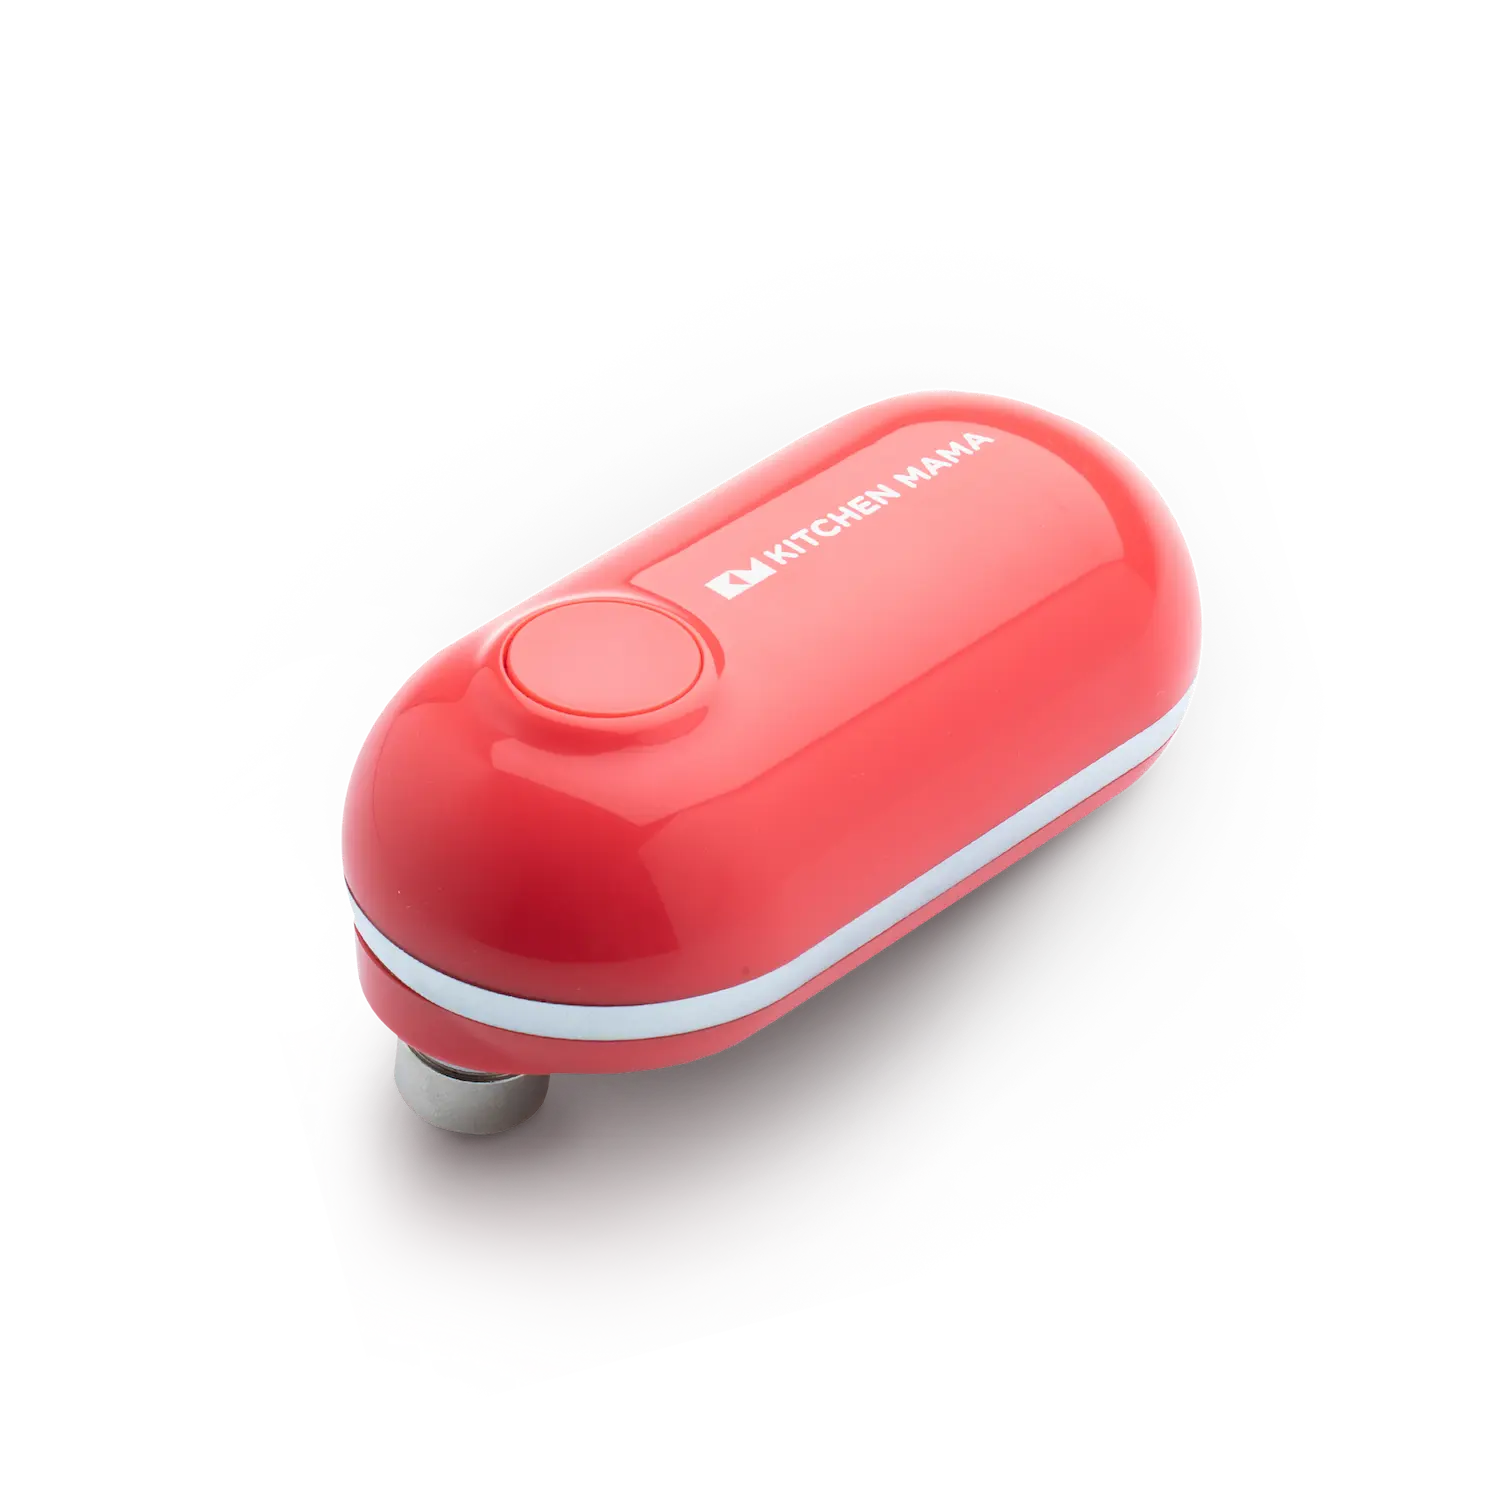 Mini Electric Can Opener - The Smallest Electric Can Opener, Red, CO1200-R, battery operated can opener, electric can openers for kitchen, red electric can opener, can openers prime for seniors with arthritis, portable can opener, space saver can opener